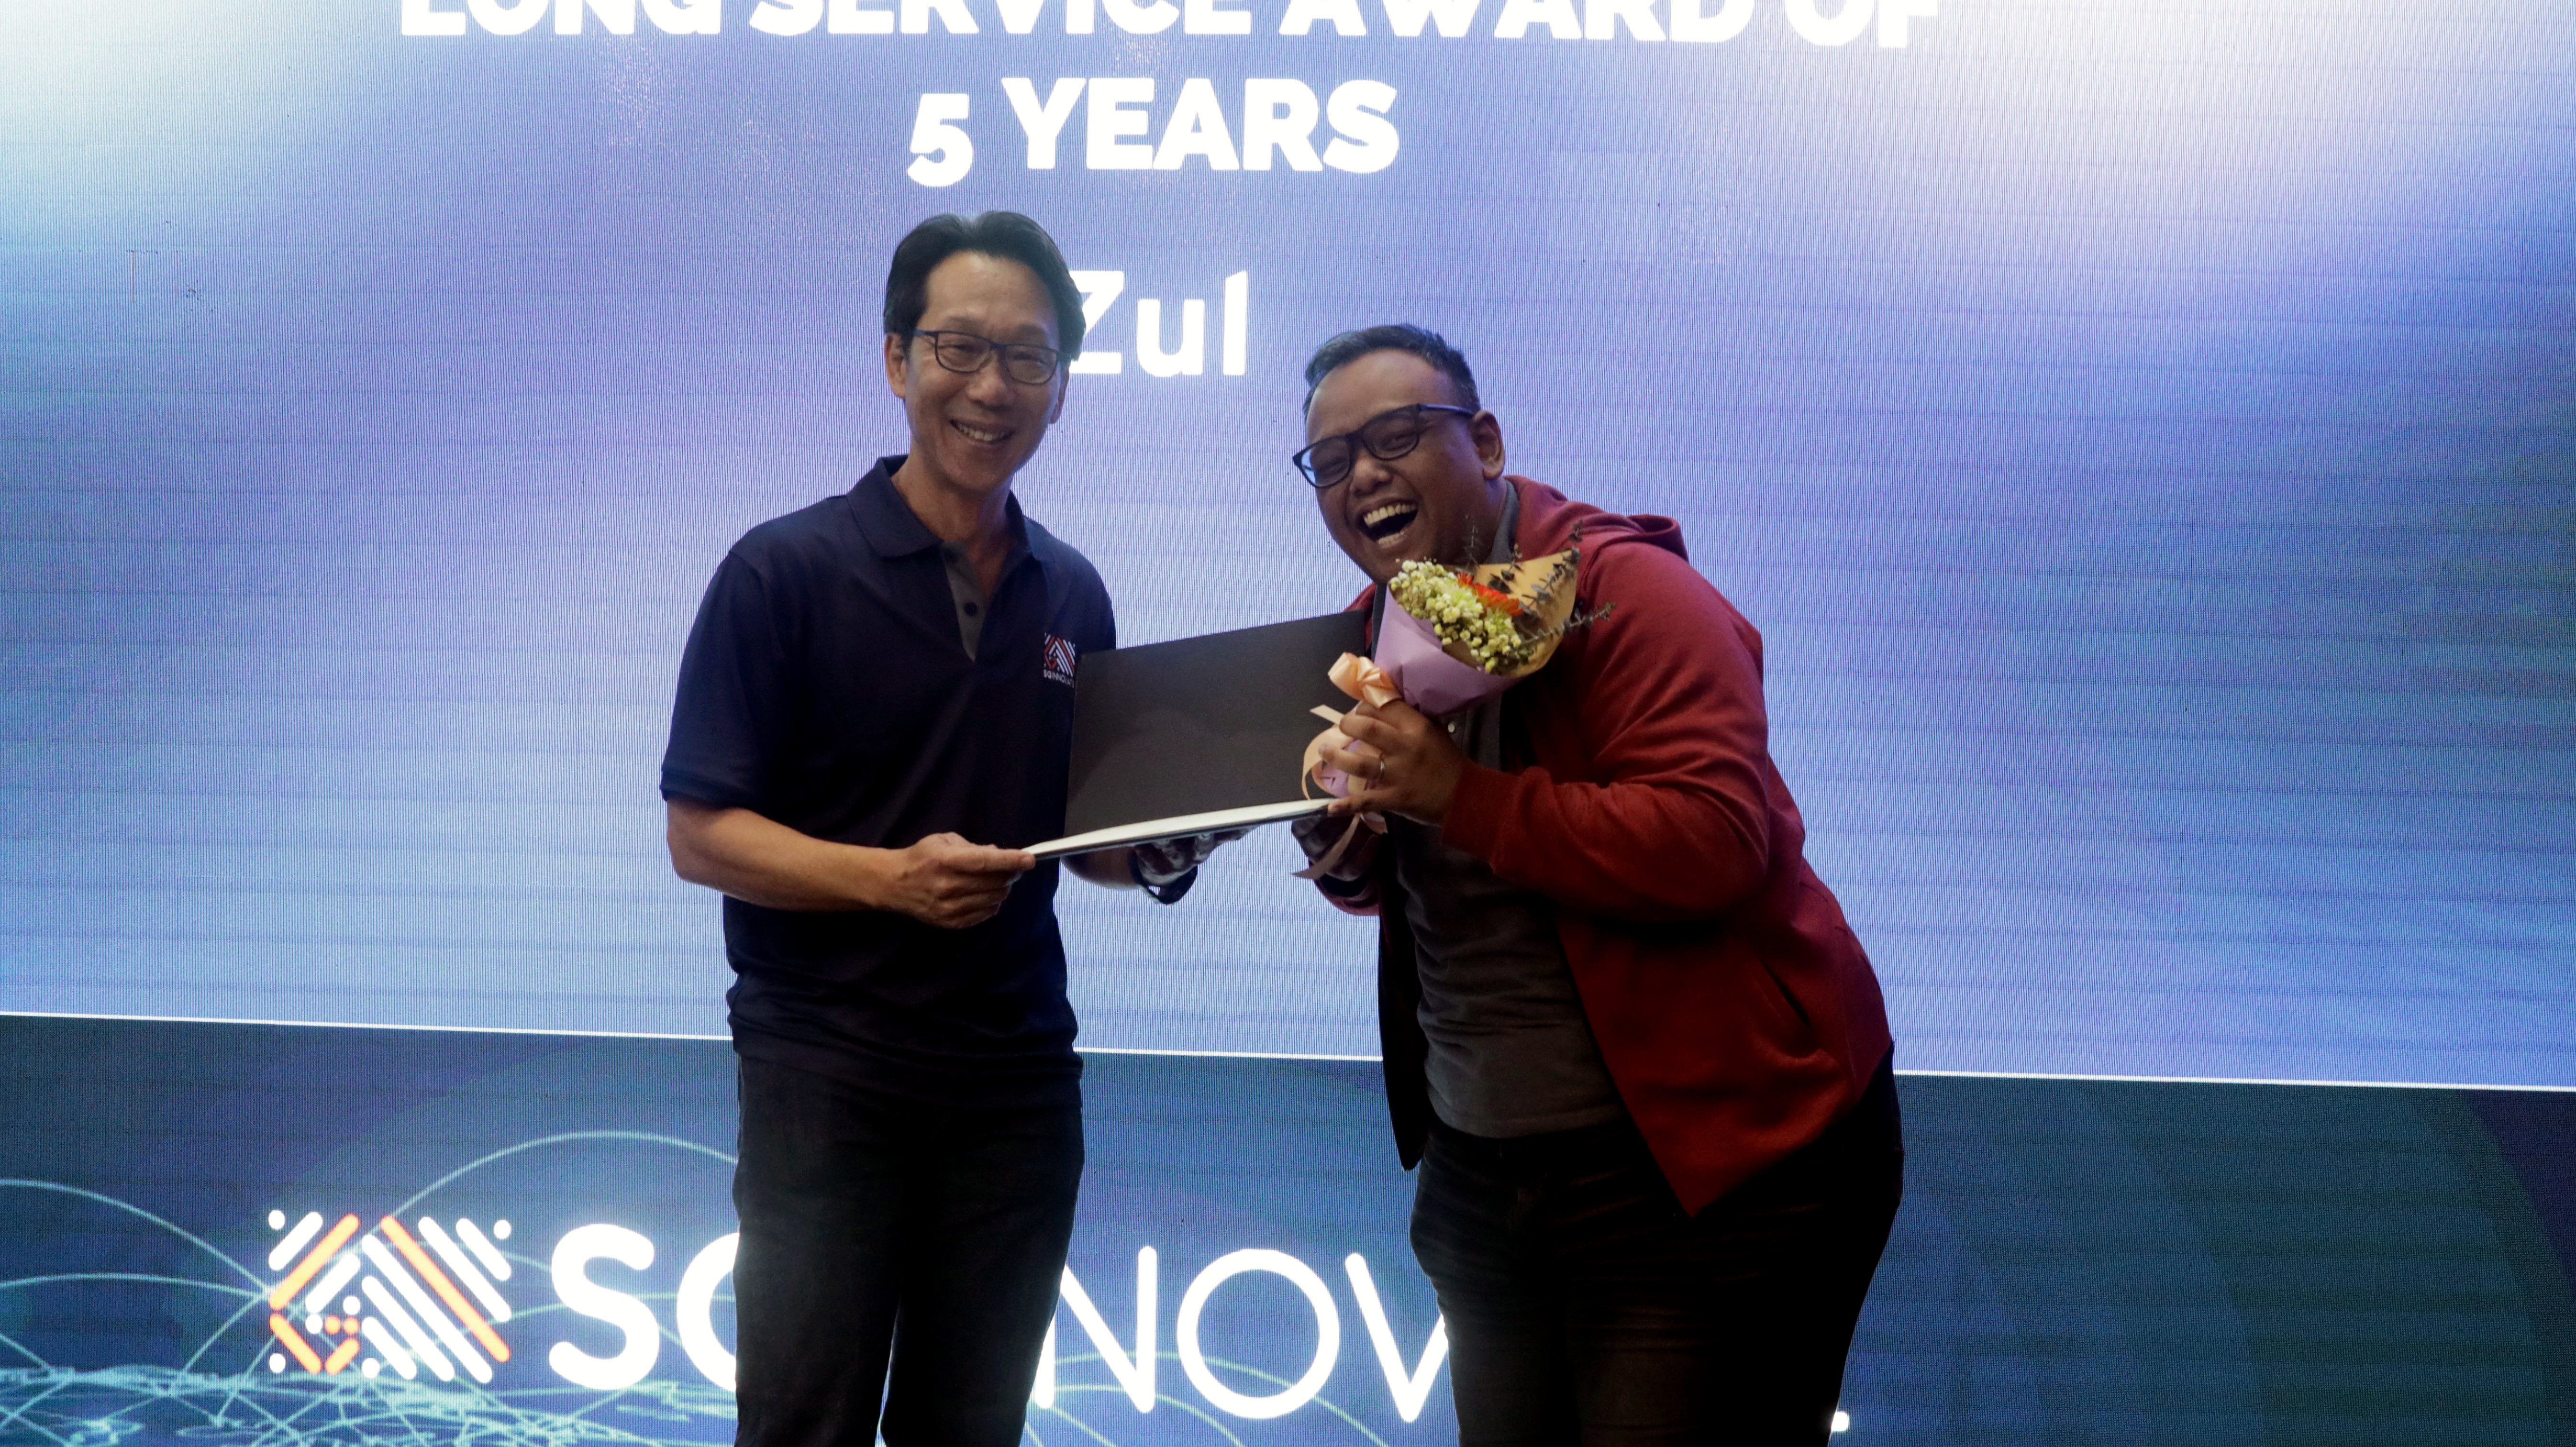 Celebrating Zul's 5 years of dedicated service to the company with a well-deserved Long Service Award.